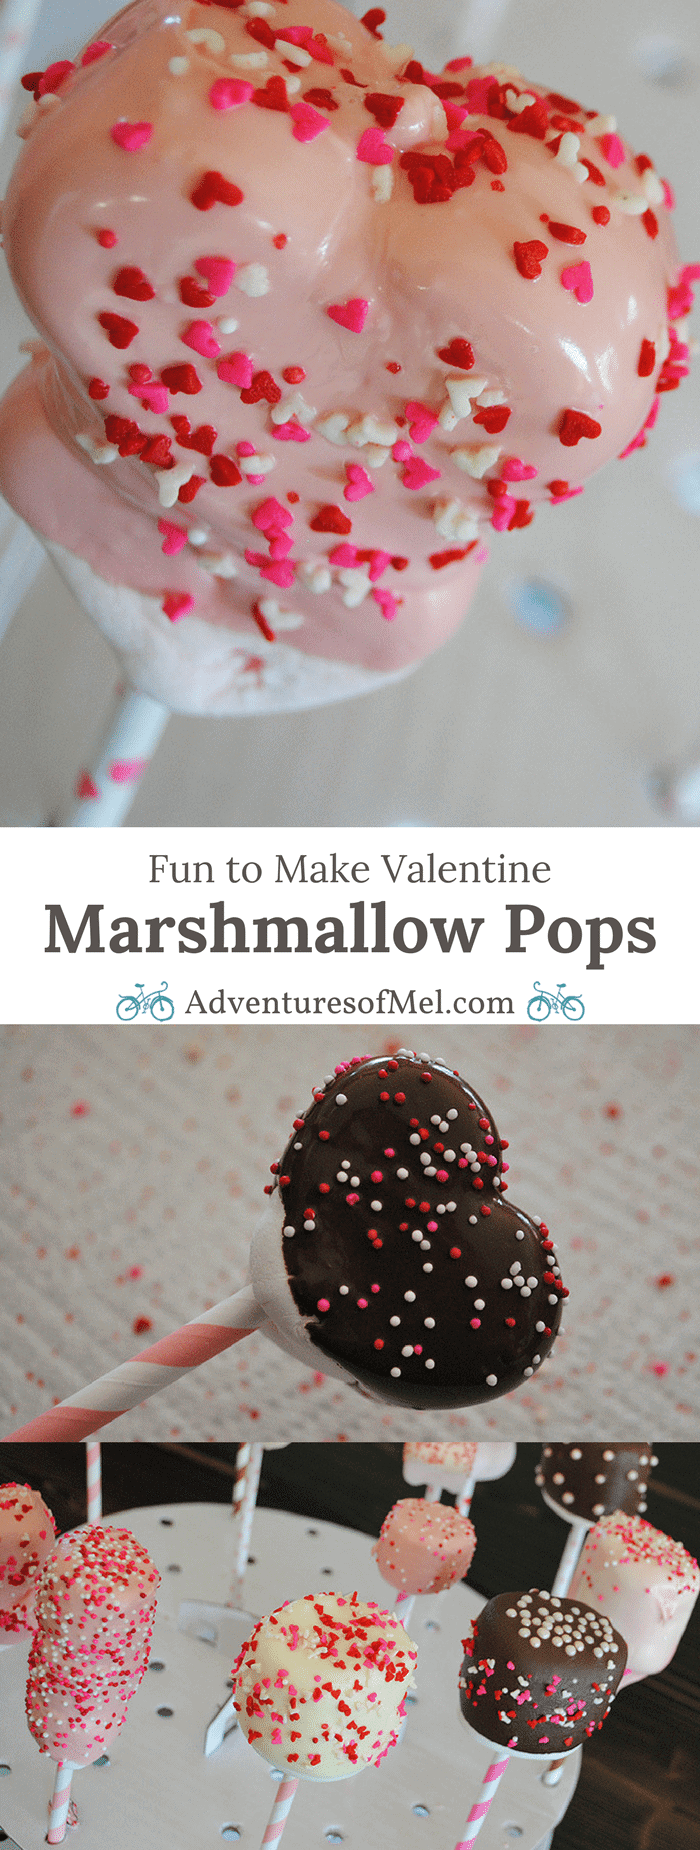 Use heart shaped marshmallows, Jet-Puffed marshmallows, paper straws, candy melts, and sprinkles to make yummy Valentine Marshmallow Pops. They're a scrumptious Valentine's Day craft or Valentine party idea, and kids love decorating these fun and easy treats. Grab the supply list and instructions.